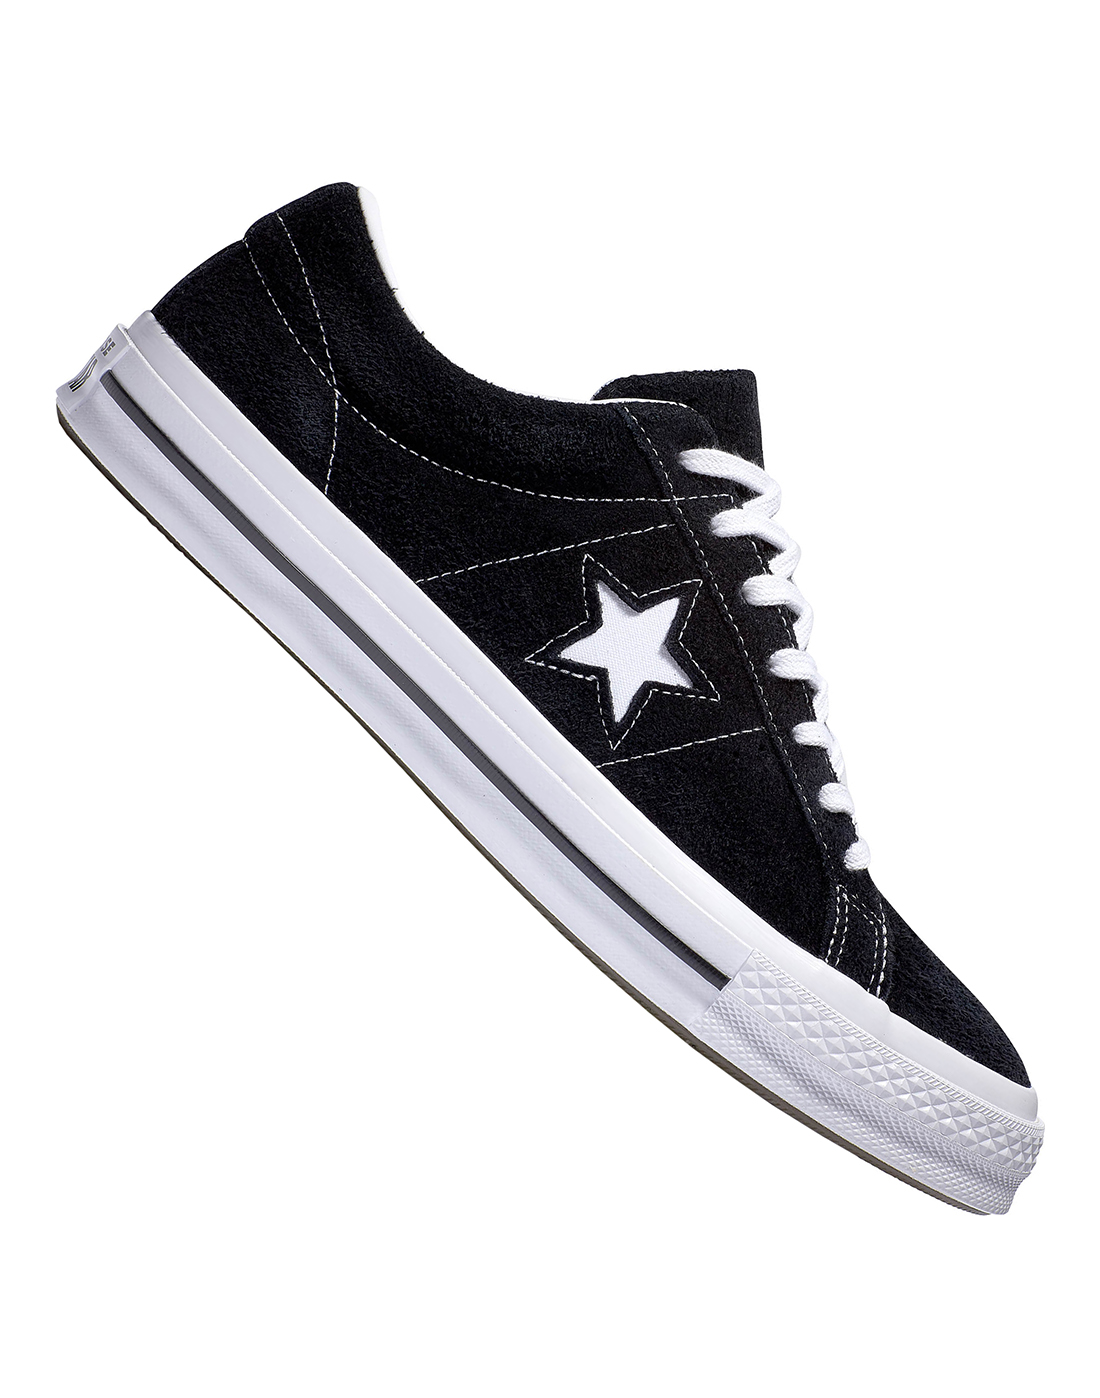 Women's Black Converse One star | Life Style Sports